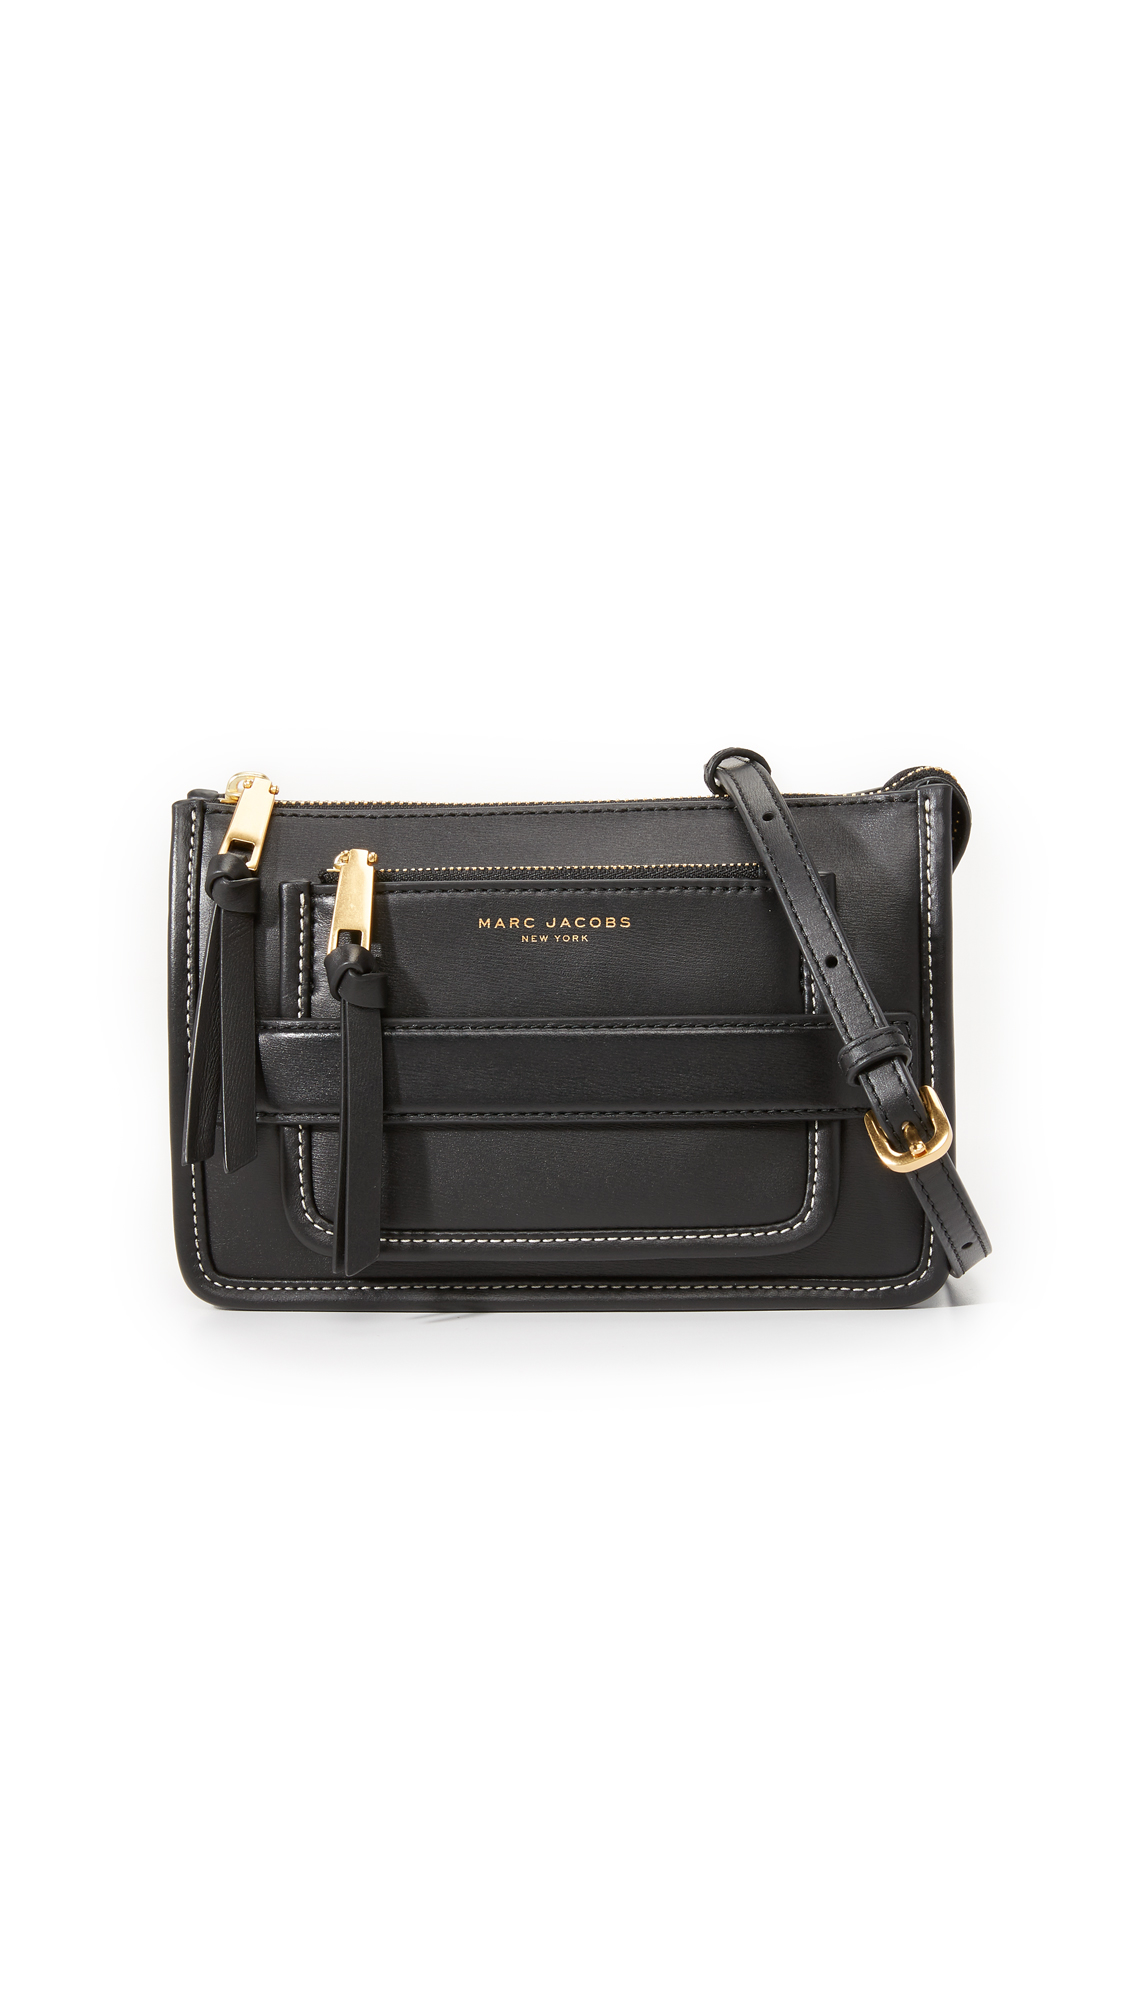 Marc Jacobs Leather Madison Cross Body Bag in Black - Lyst